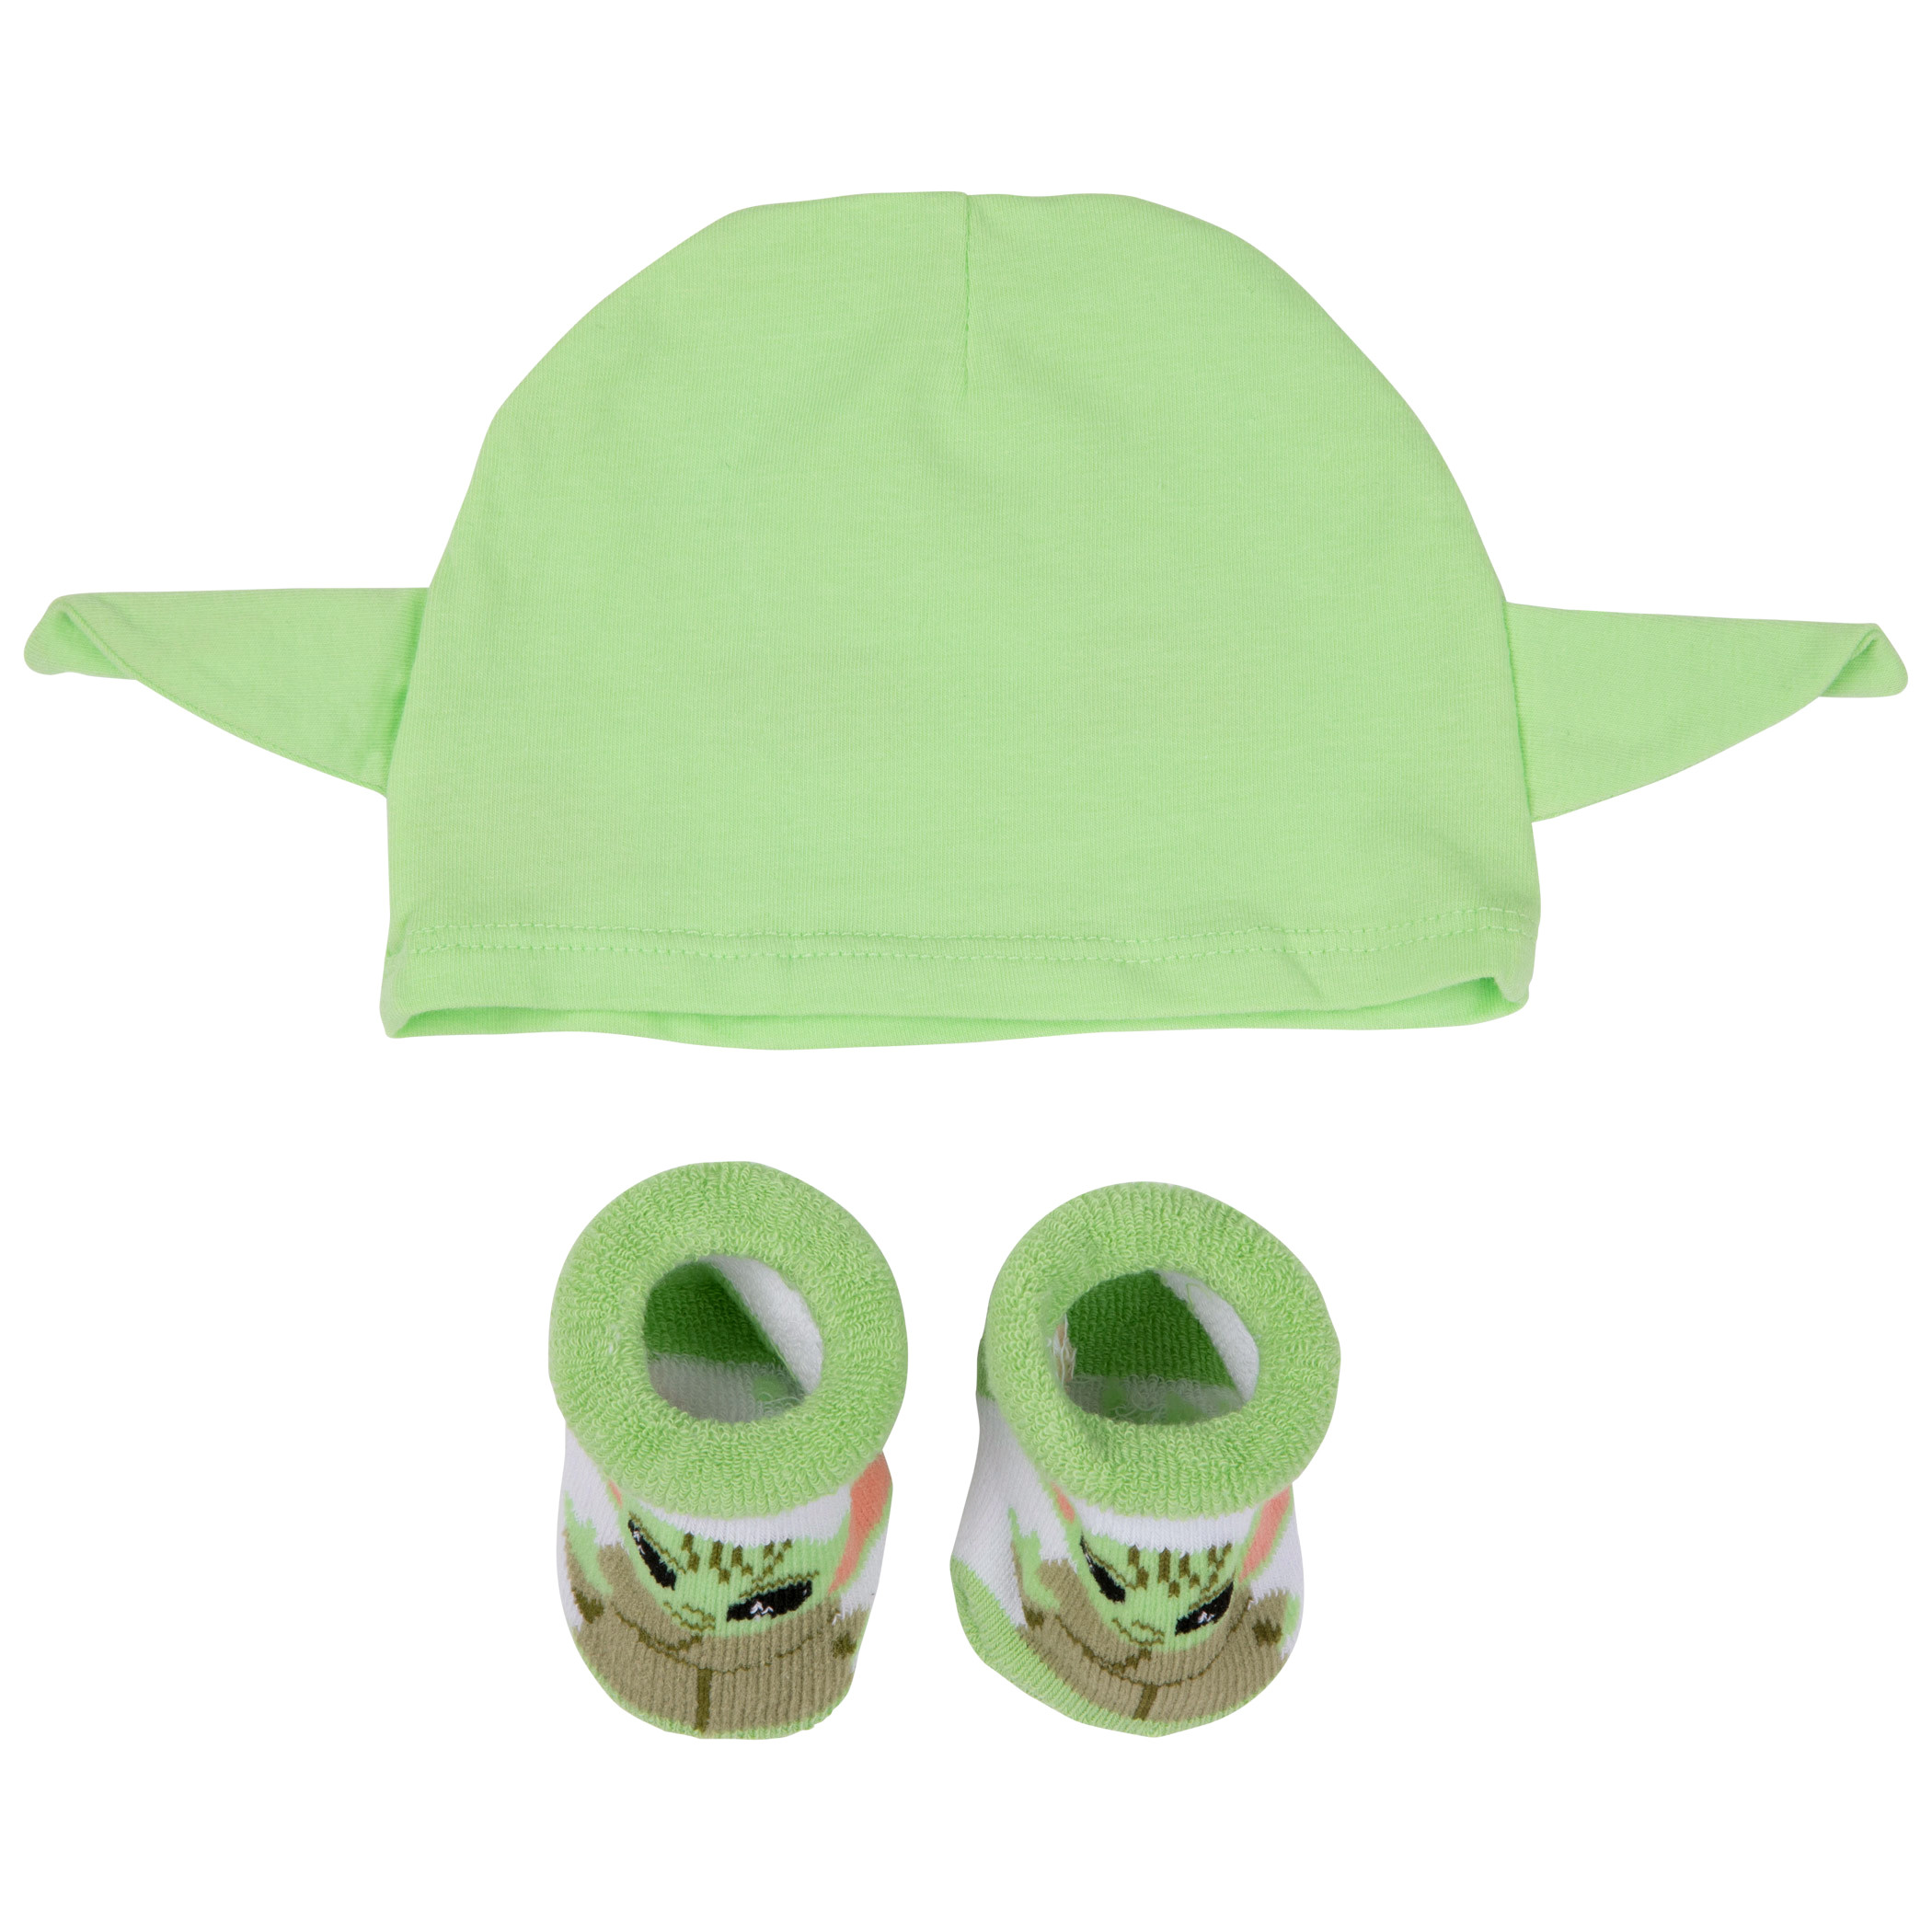 Star Wars The Mandalorian The Child Grogu 2-Piece Hat and Booties Set